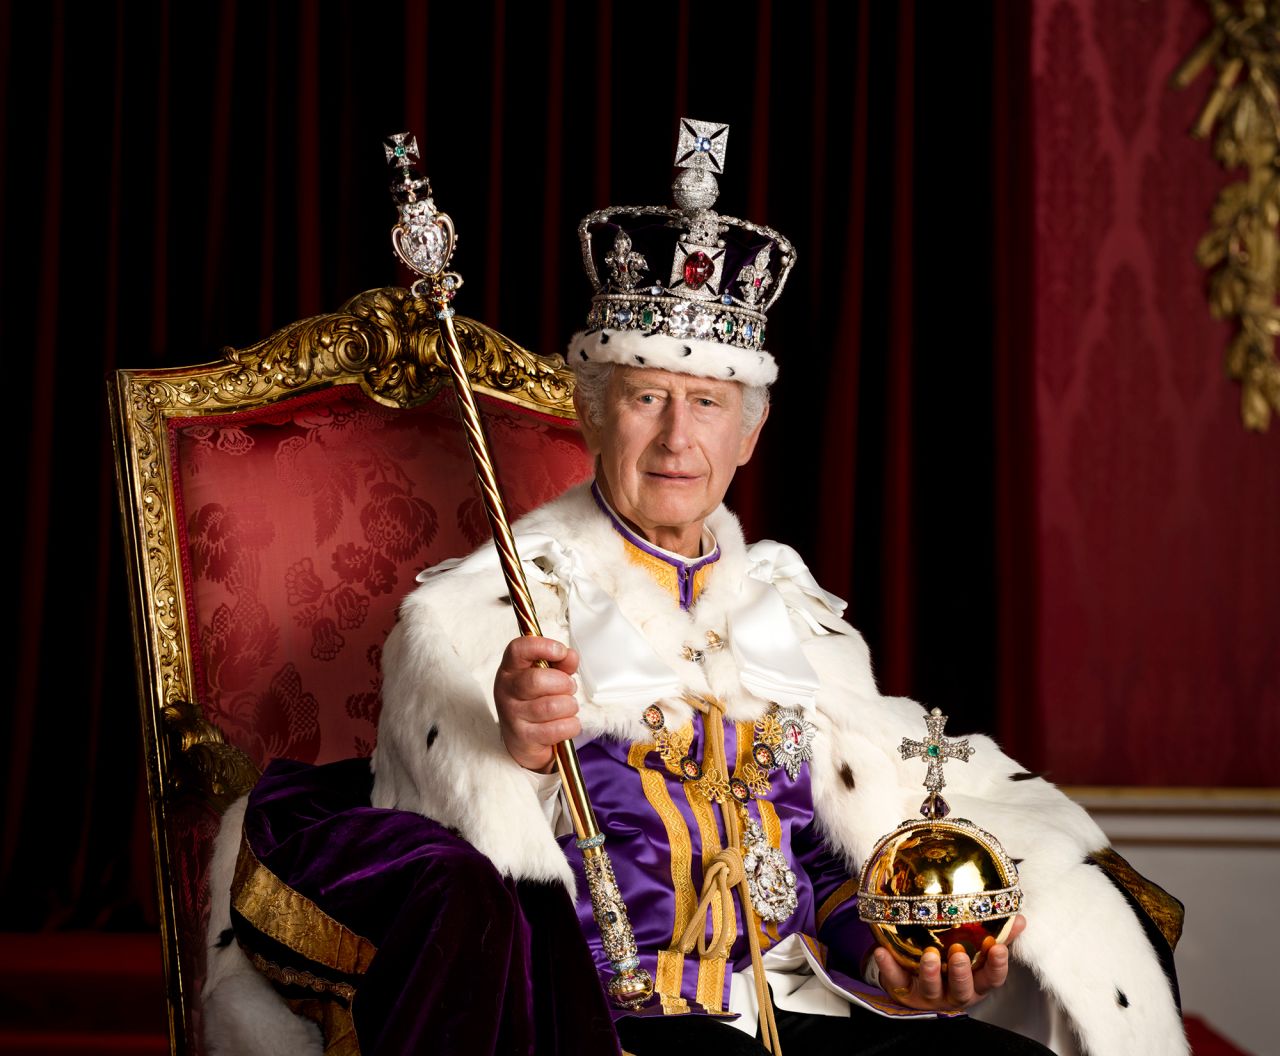 Britain's King Charles III <a href="https://www.cnn.com/2023/05/08/uk/coronation-official-portraits-intl-gbr-ckc/index.html" target="_blank">poses for a portrait</a> in Buckingham Palace's Throne Room after his official coronation in May 2023.